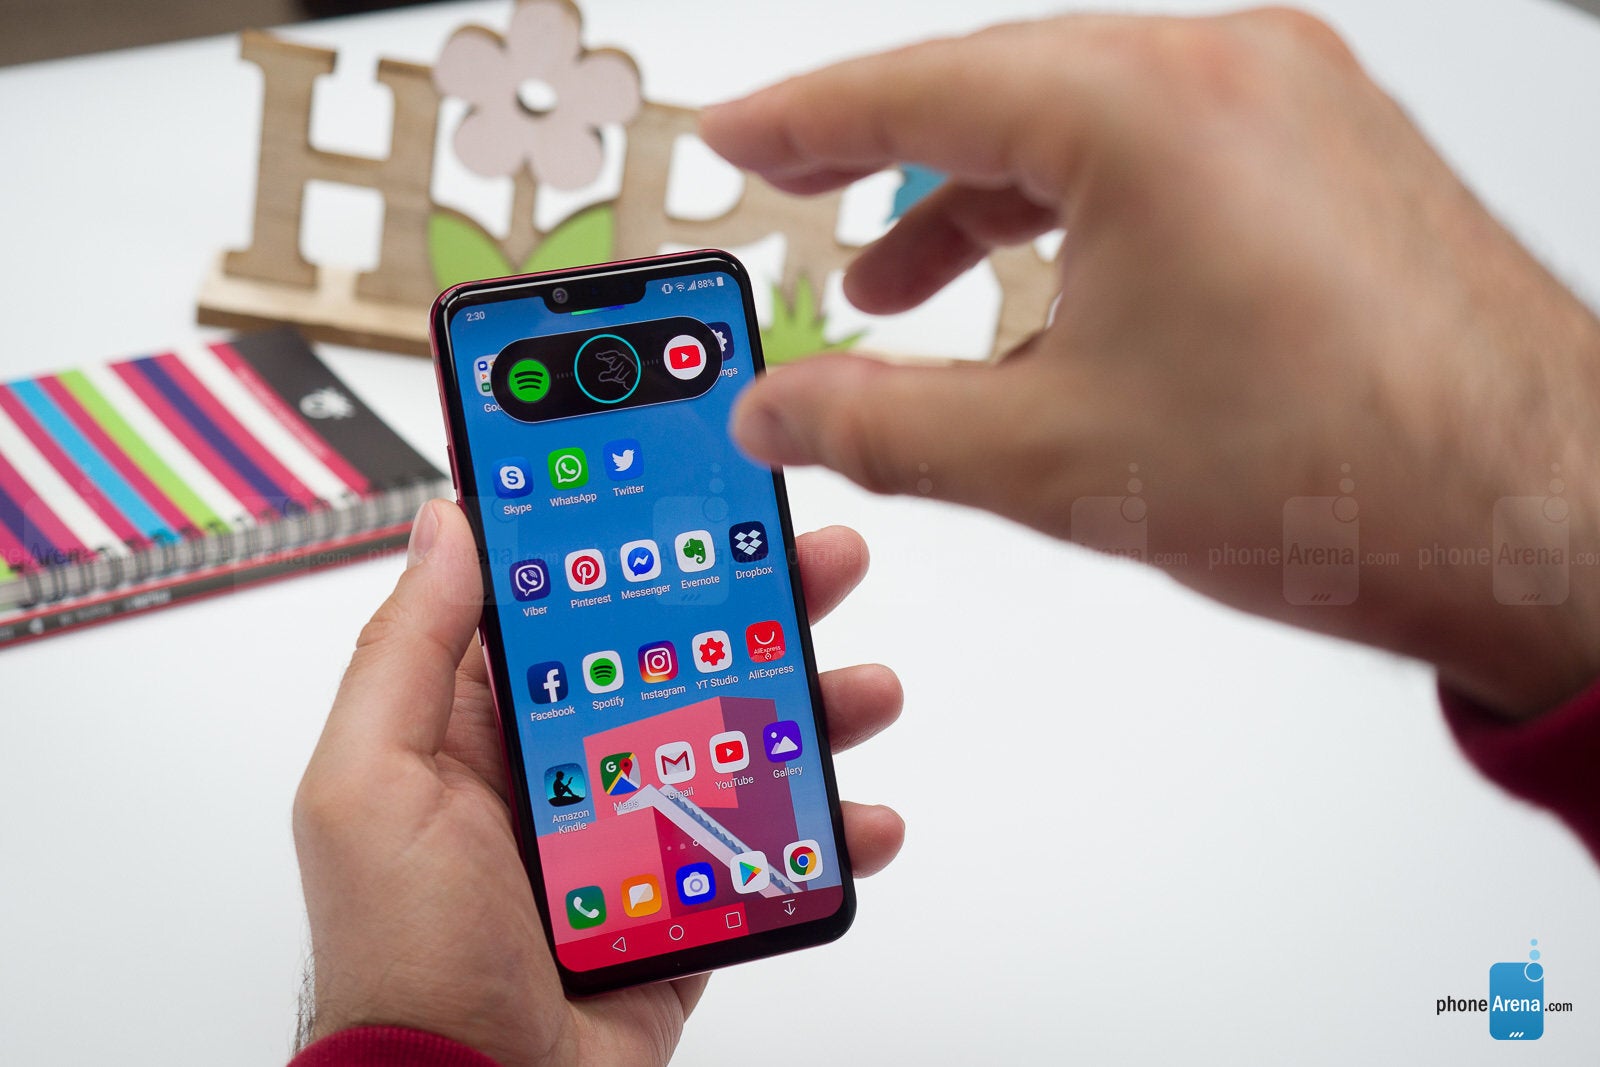 5 ways LG was ahead of the competition and how that didn't matter